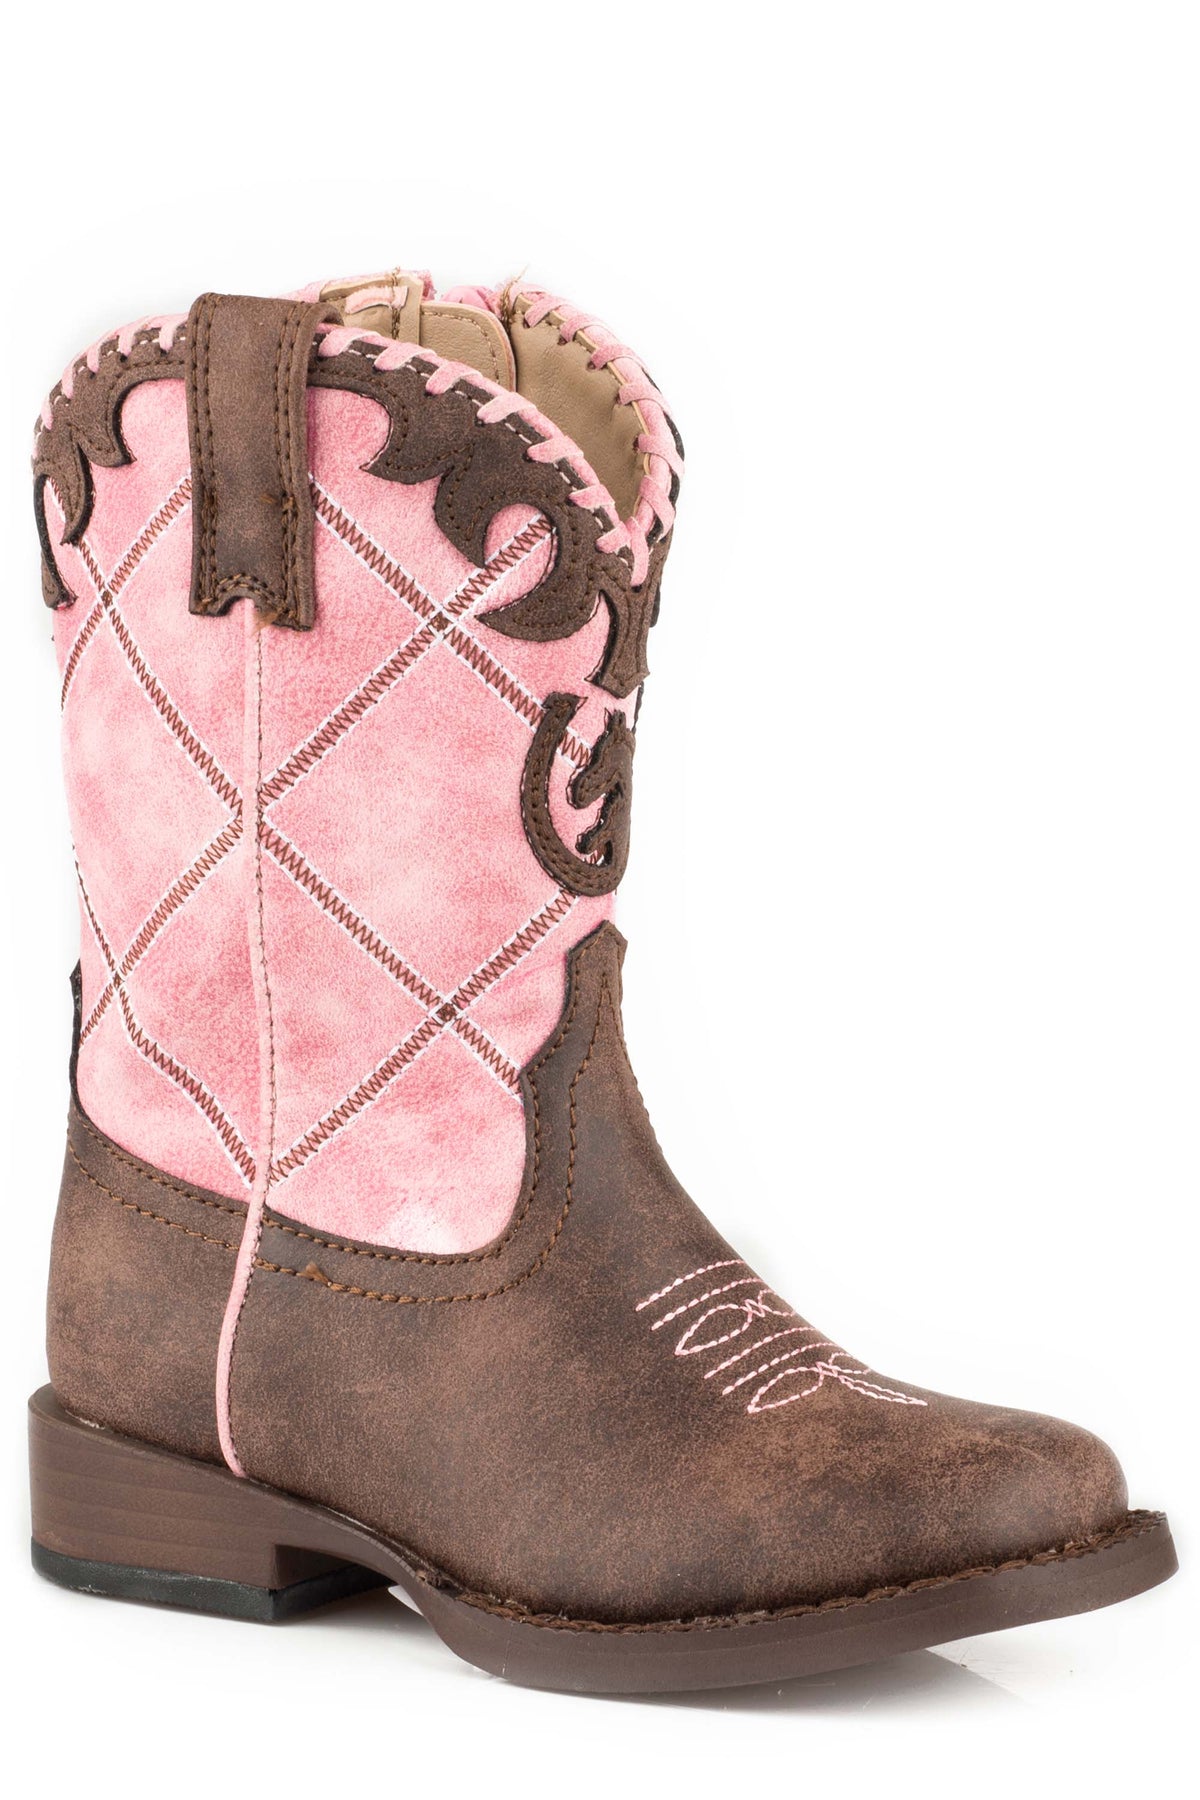 Roper Girls Toddler Brown With Pink Diamond Embroidery